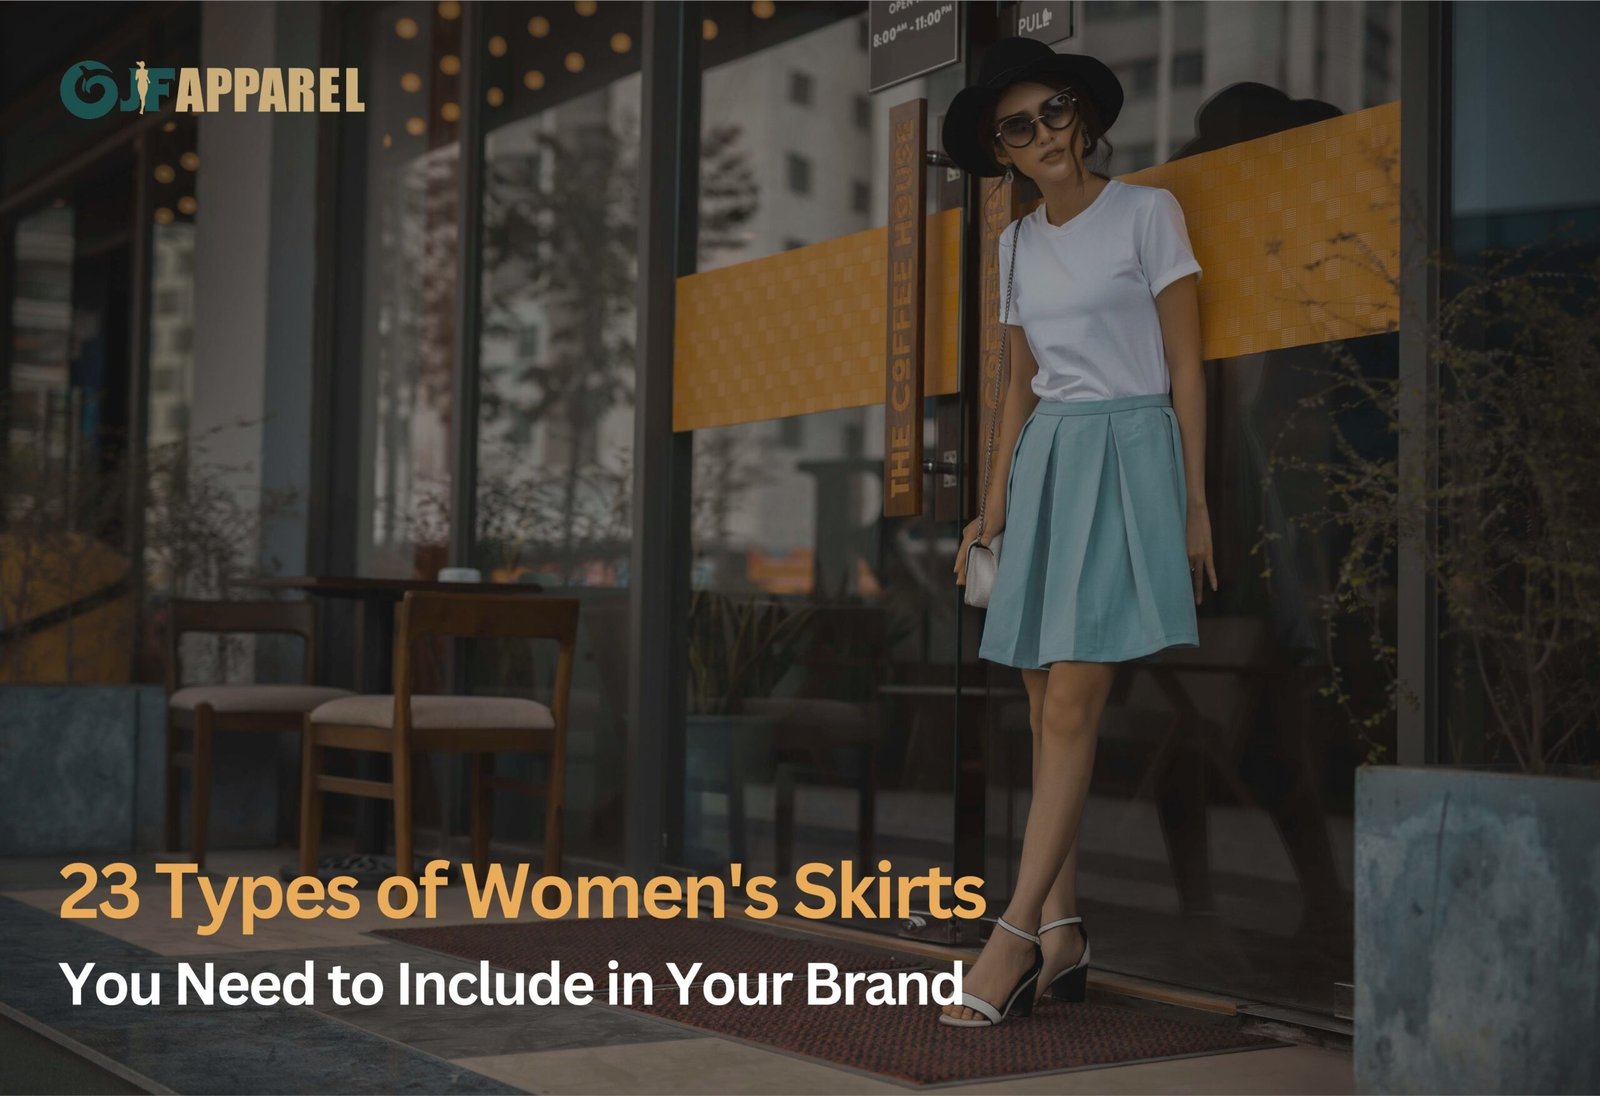 23 Types of Women's Skirts You Need to Include in Your Brand